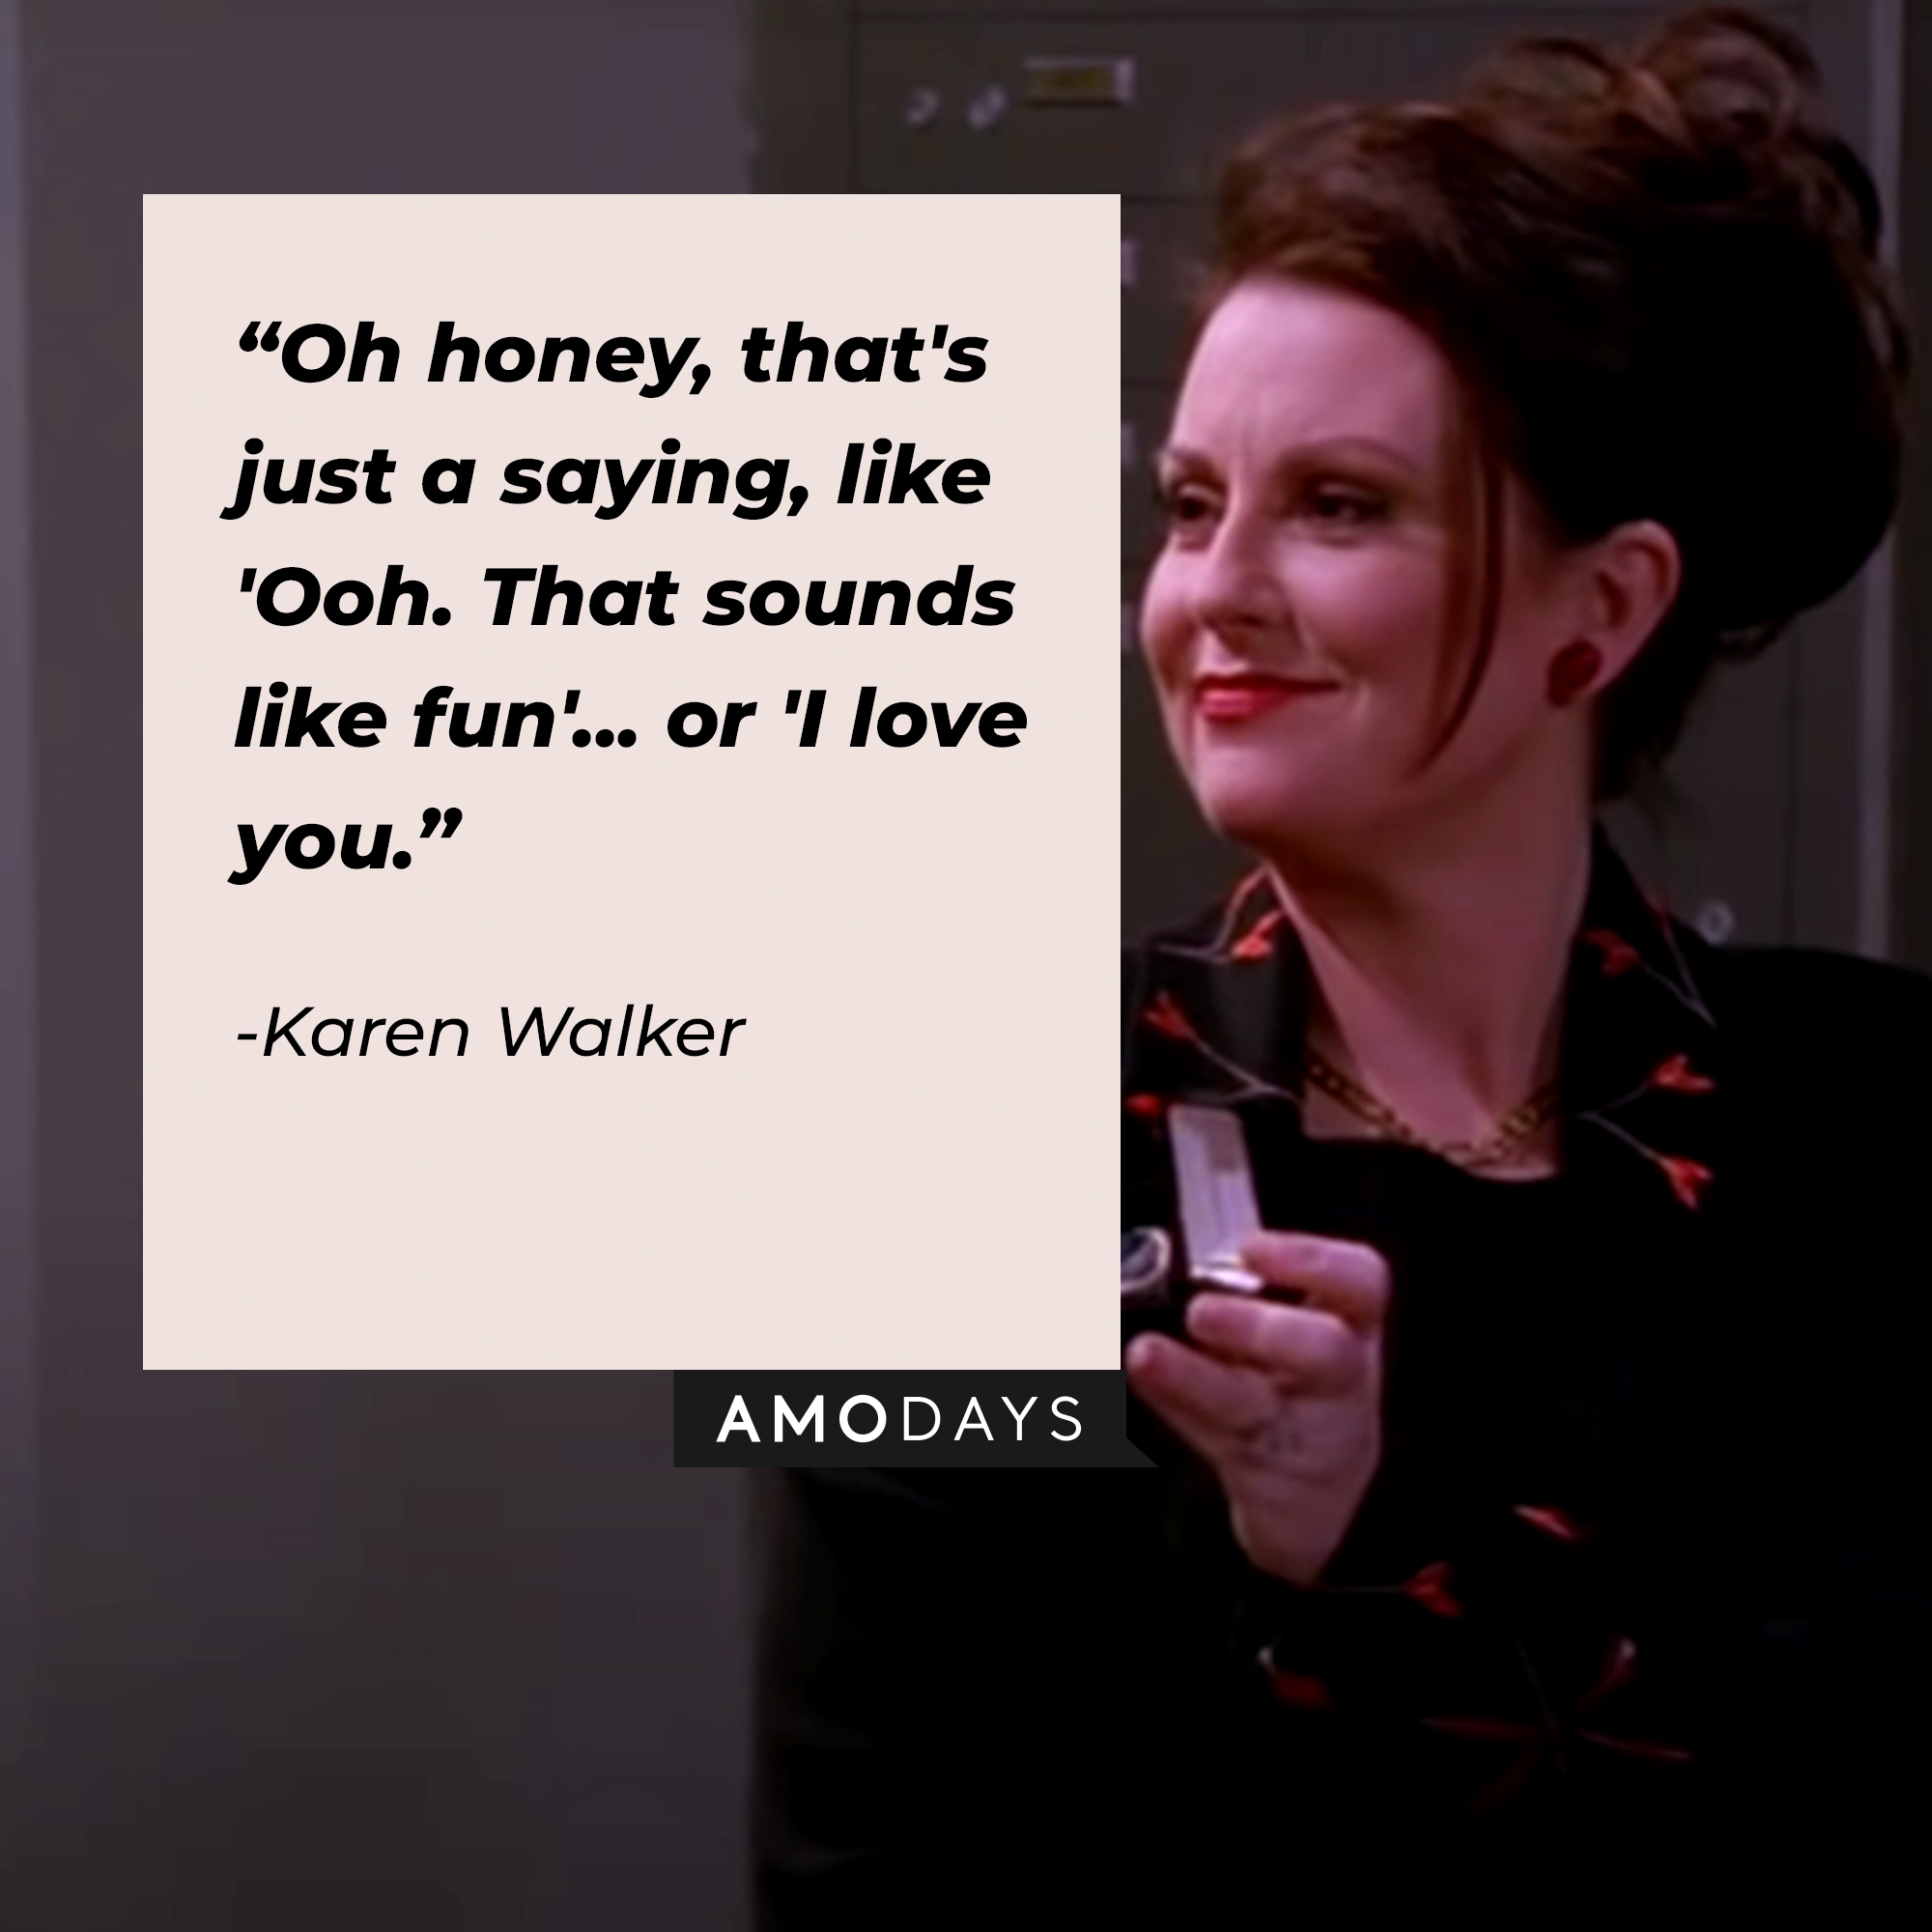 A photo of Karen Walker with the quote, "Oh honey, that's just a saying, like 'Ooh. That sounds like fun'... or 'I love you.'" | Source: YouTube/ComedyBites